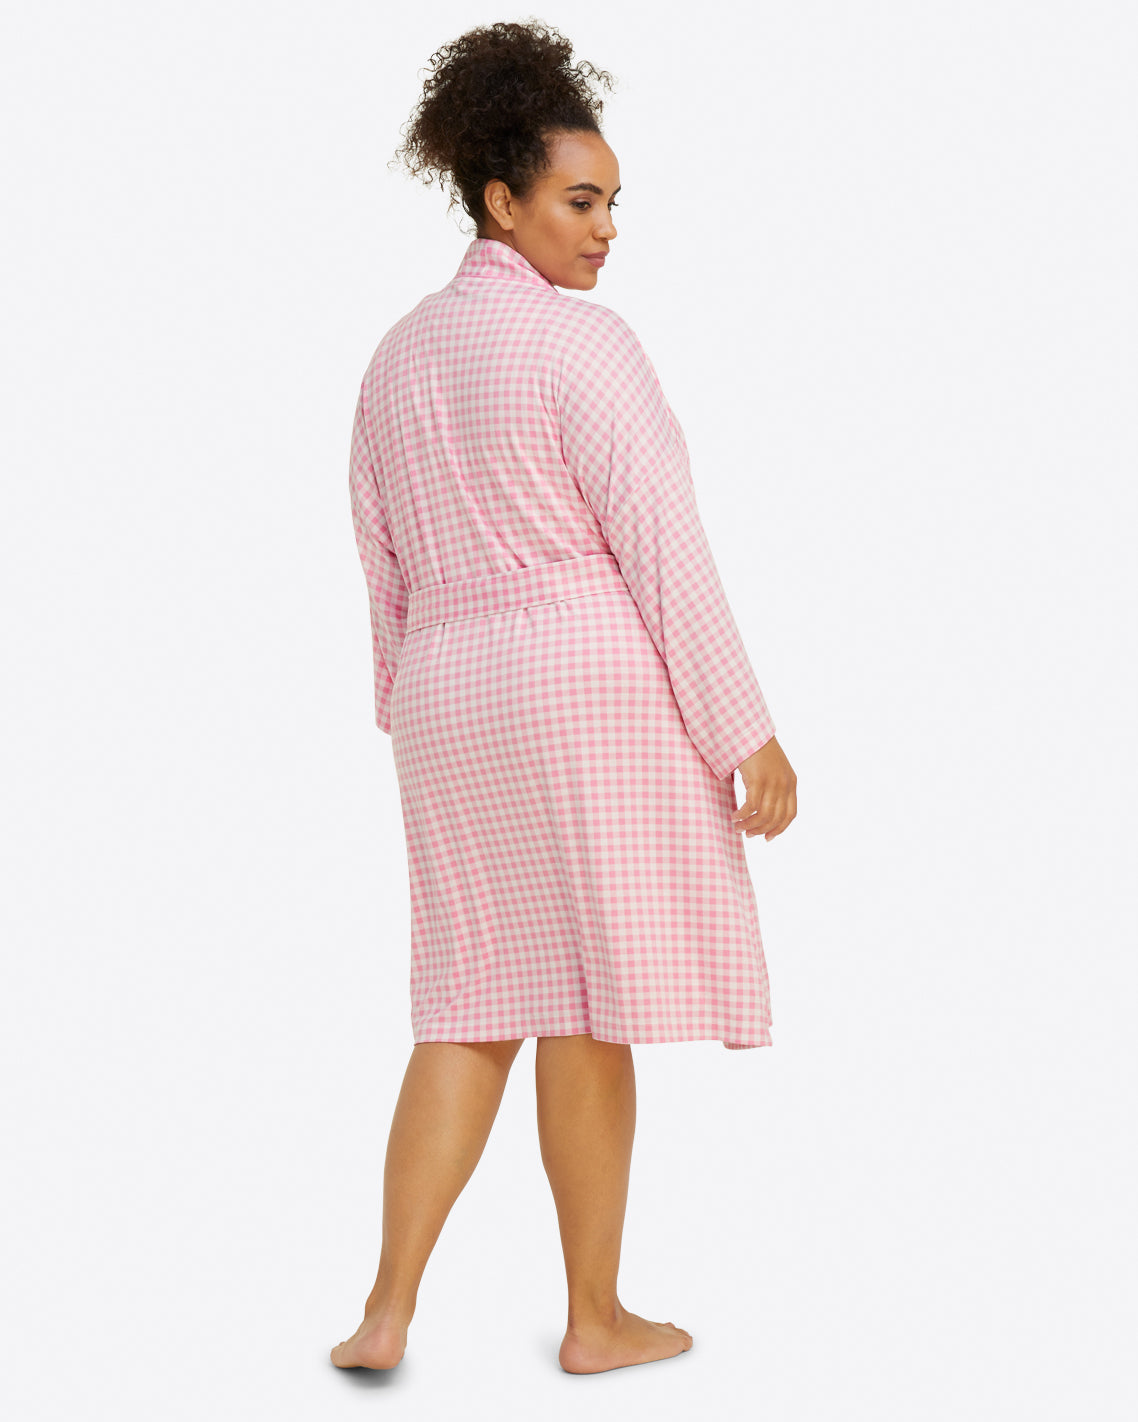 Louise Robe in Light Pink Gingham